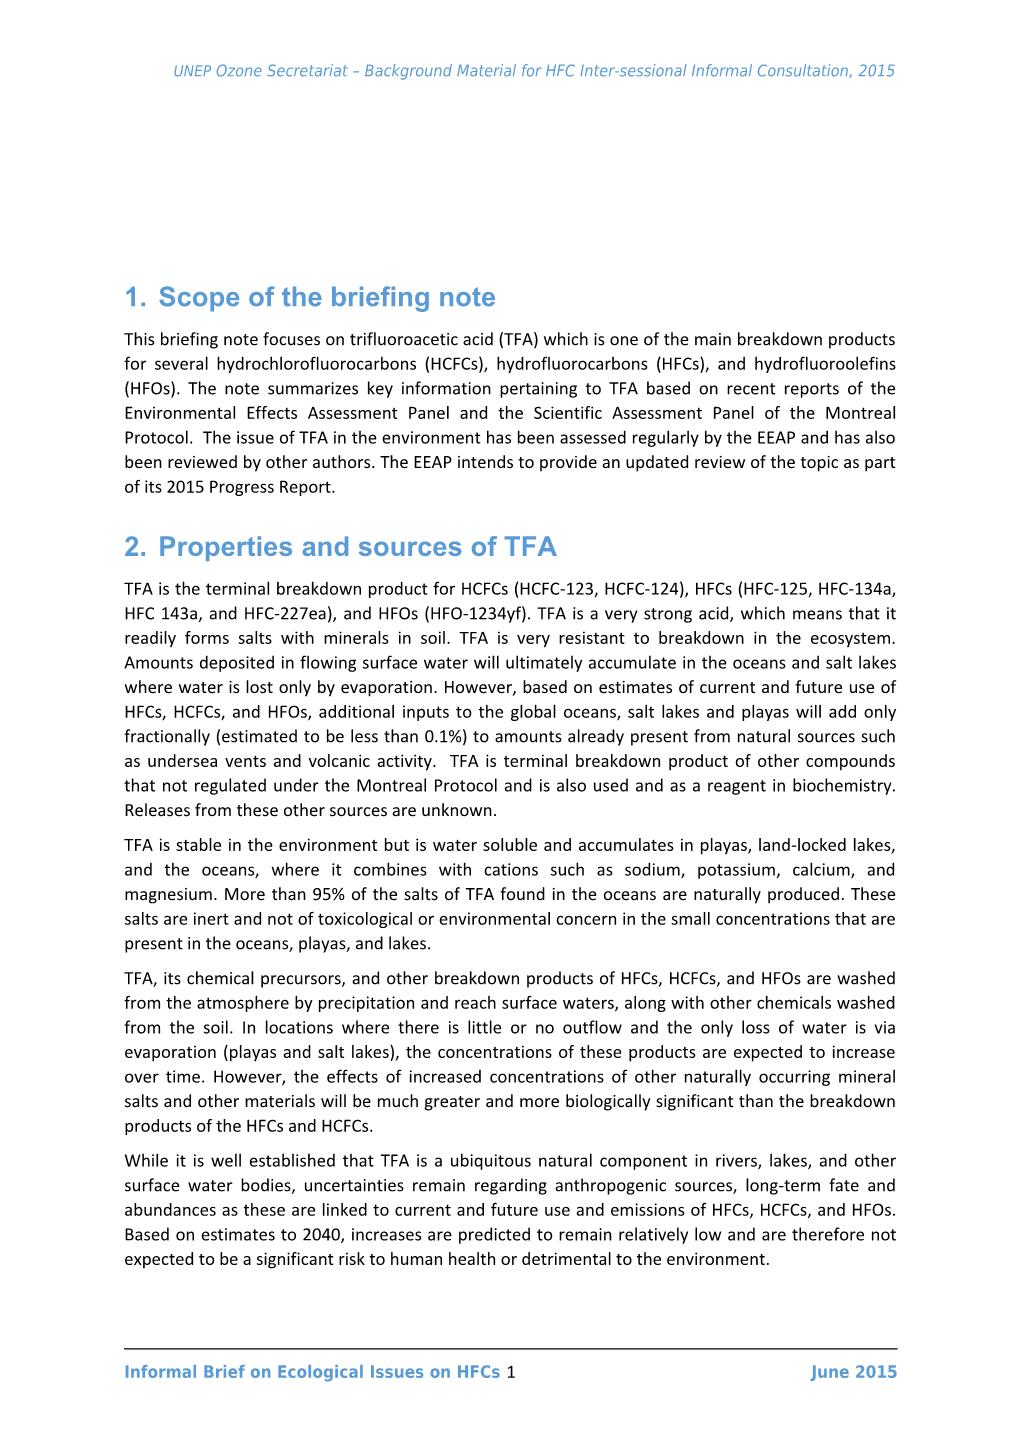 Ecological Issues on the Feasibility of Managing Hfcs: Focus on TFA